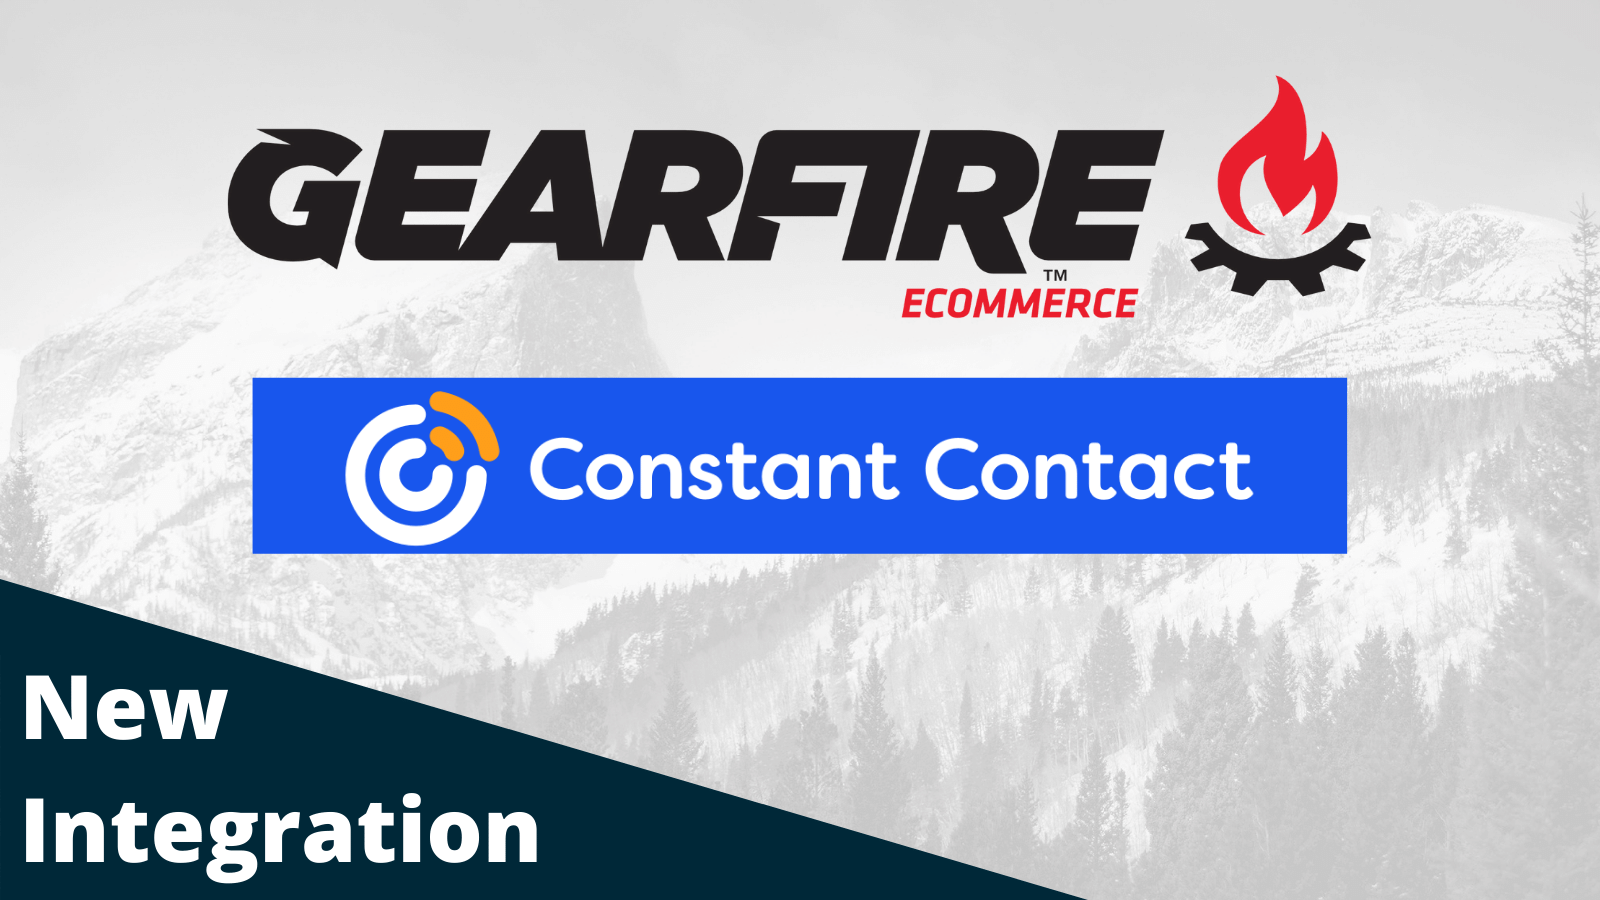 Gearfire eCommerce Welcomes a New Integration: Constant Contact! featured img